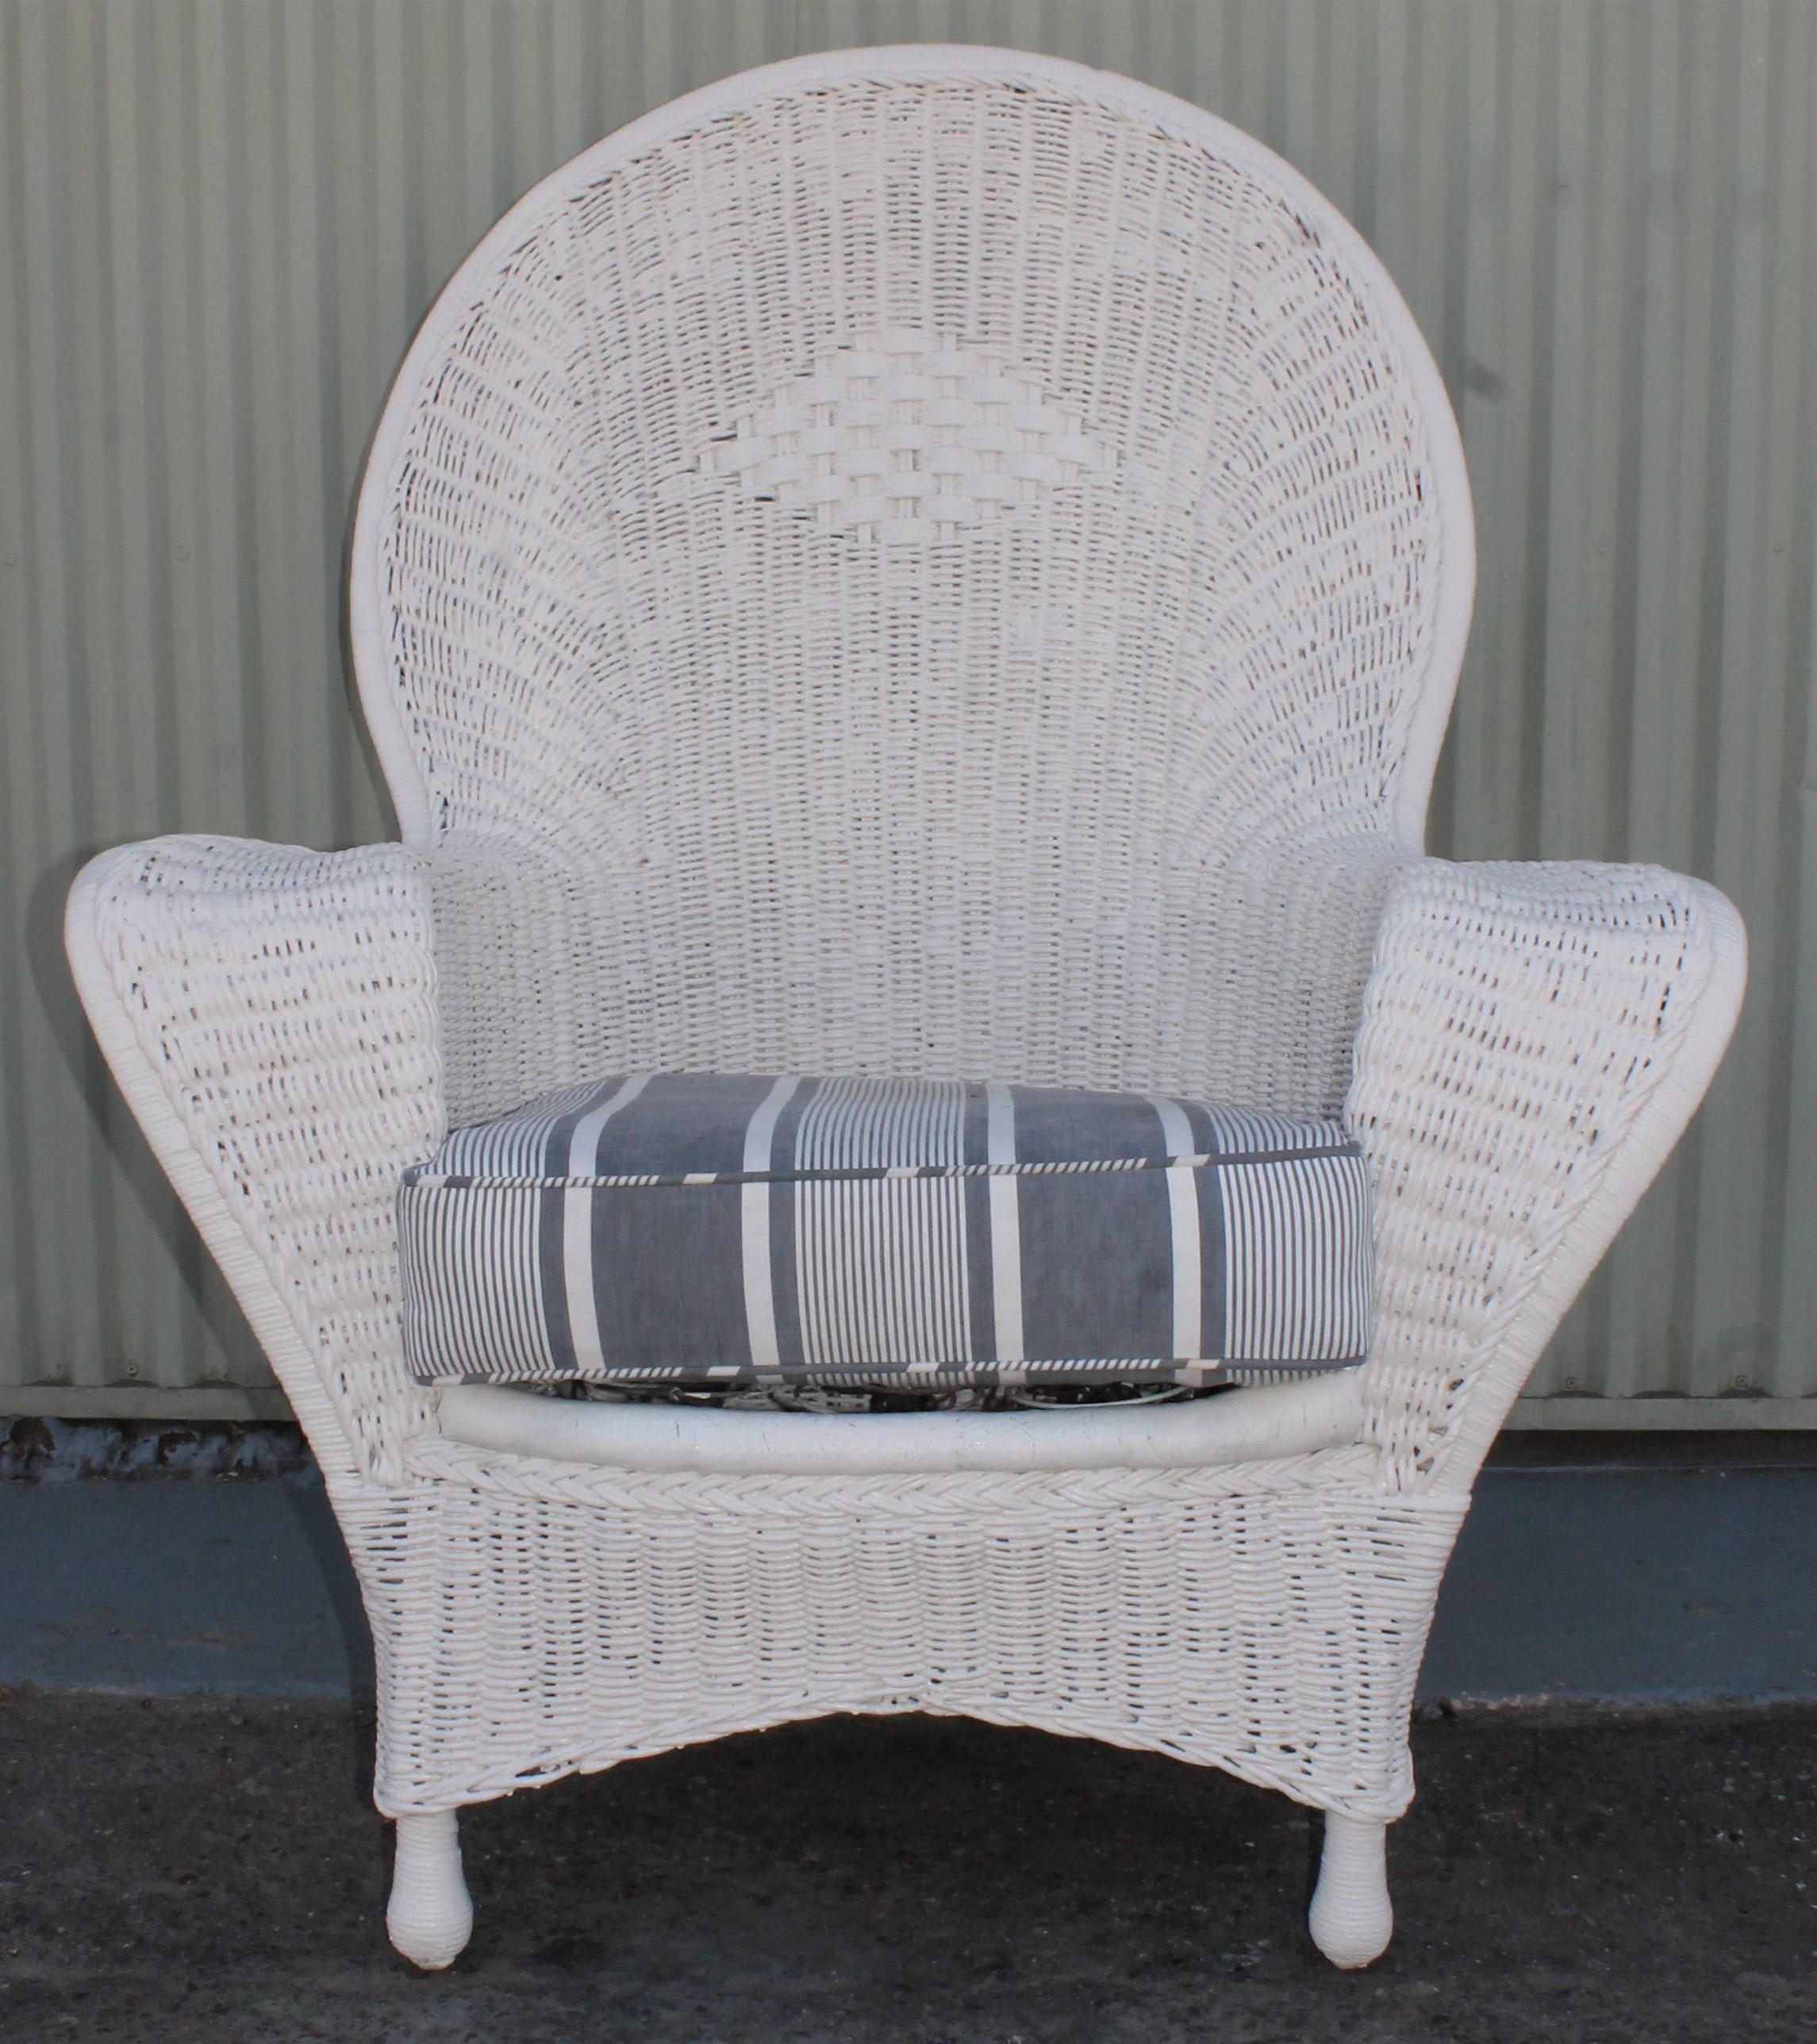 Stunning over painted American wicker fan back chair with spring seats and ticking pillow as cushion. This chair comes with a 19th century black and white faded ticking cushion. The condition on this oversize bar harbor chair is very good and